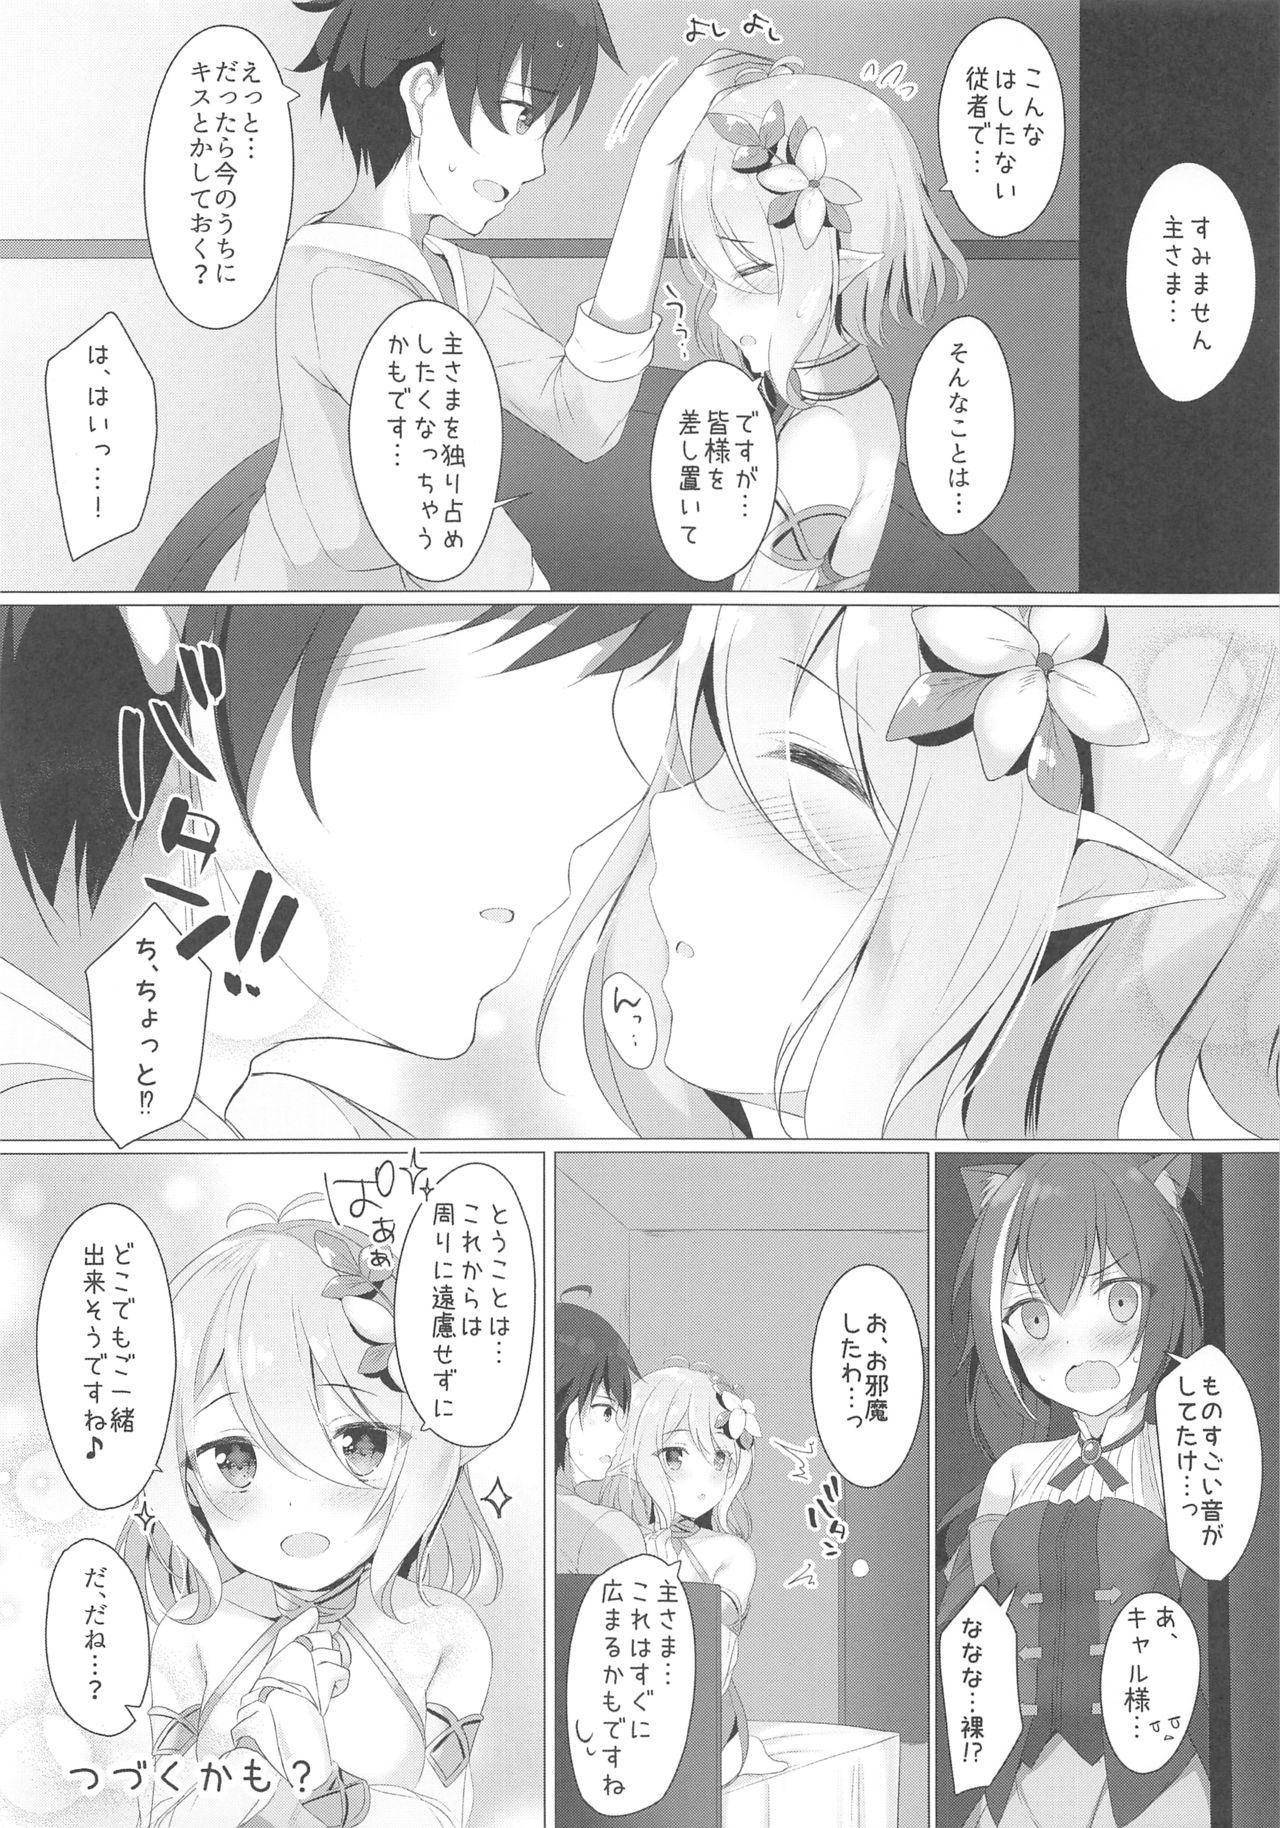 Threeway (C97) [Twilight Road (Tomo)] Kokkoro-chan to Connect Shitai! -Re:Dive‐ (Princess Connect! Re:Dive) - Princess connect Spoon - Page 19